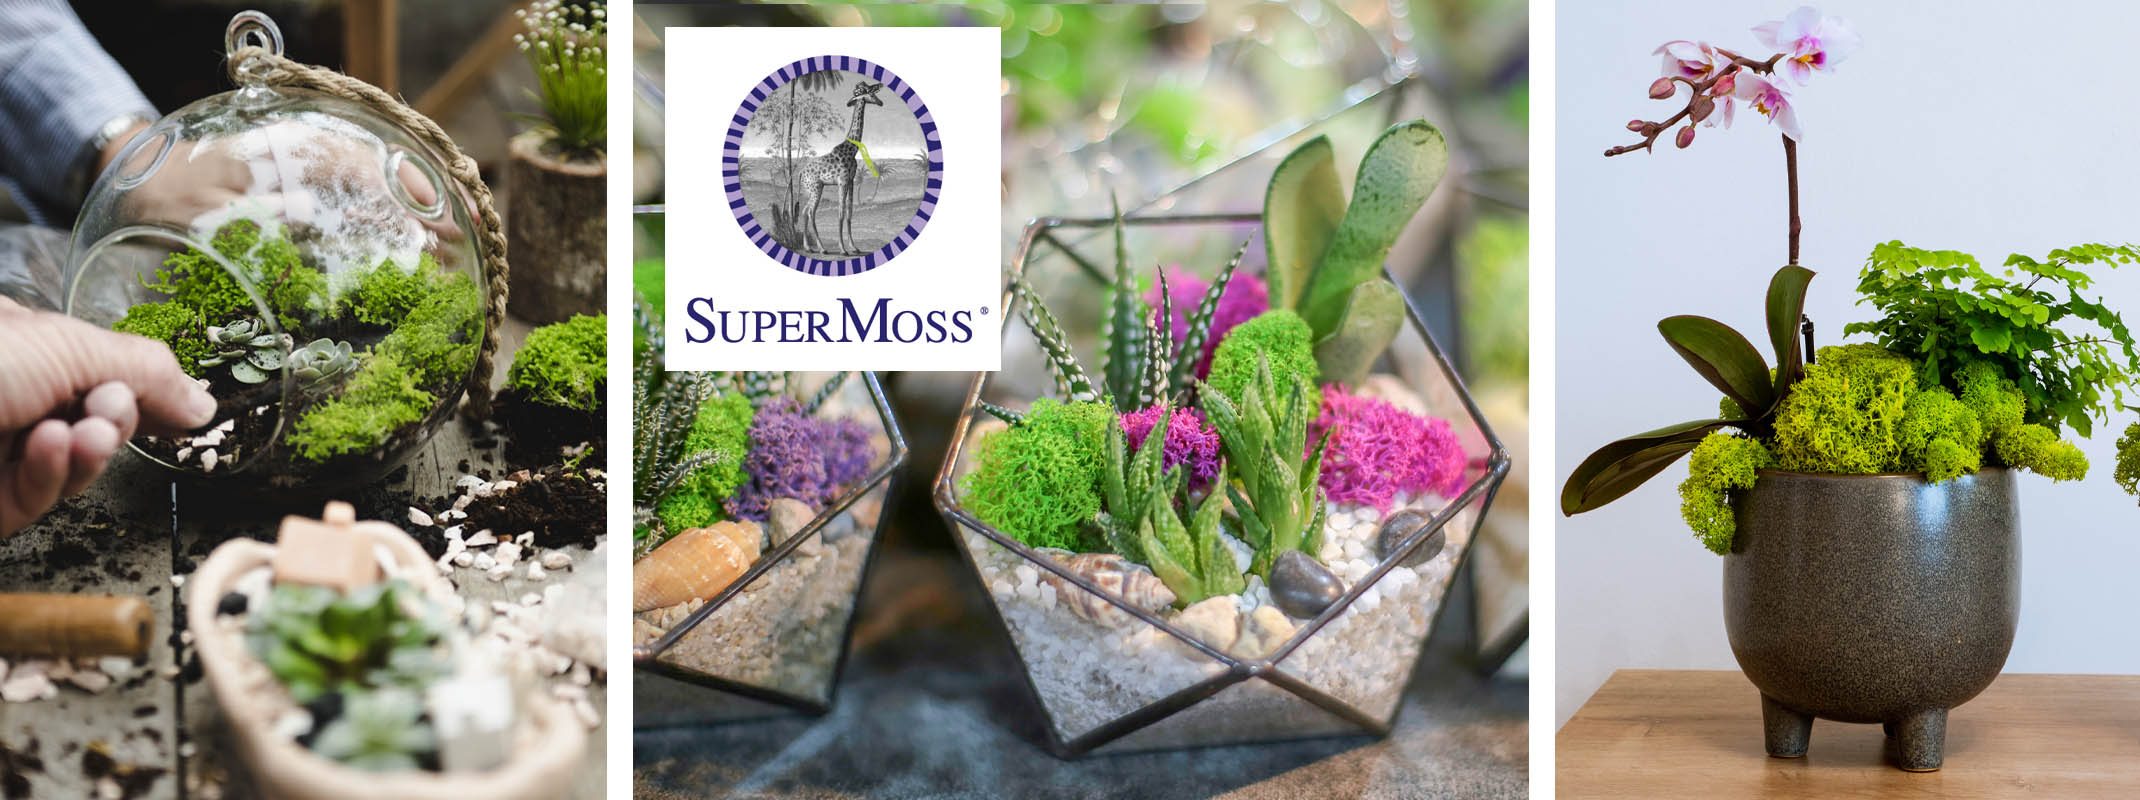 super moss terrariums, planters with different kinds of plants and moss